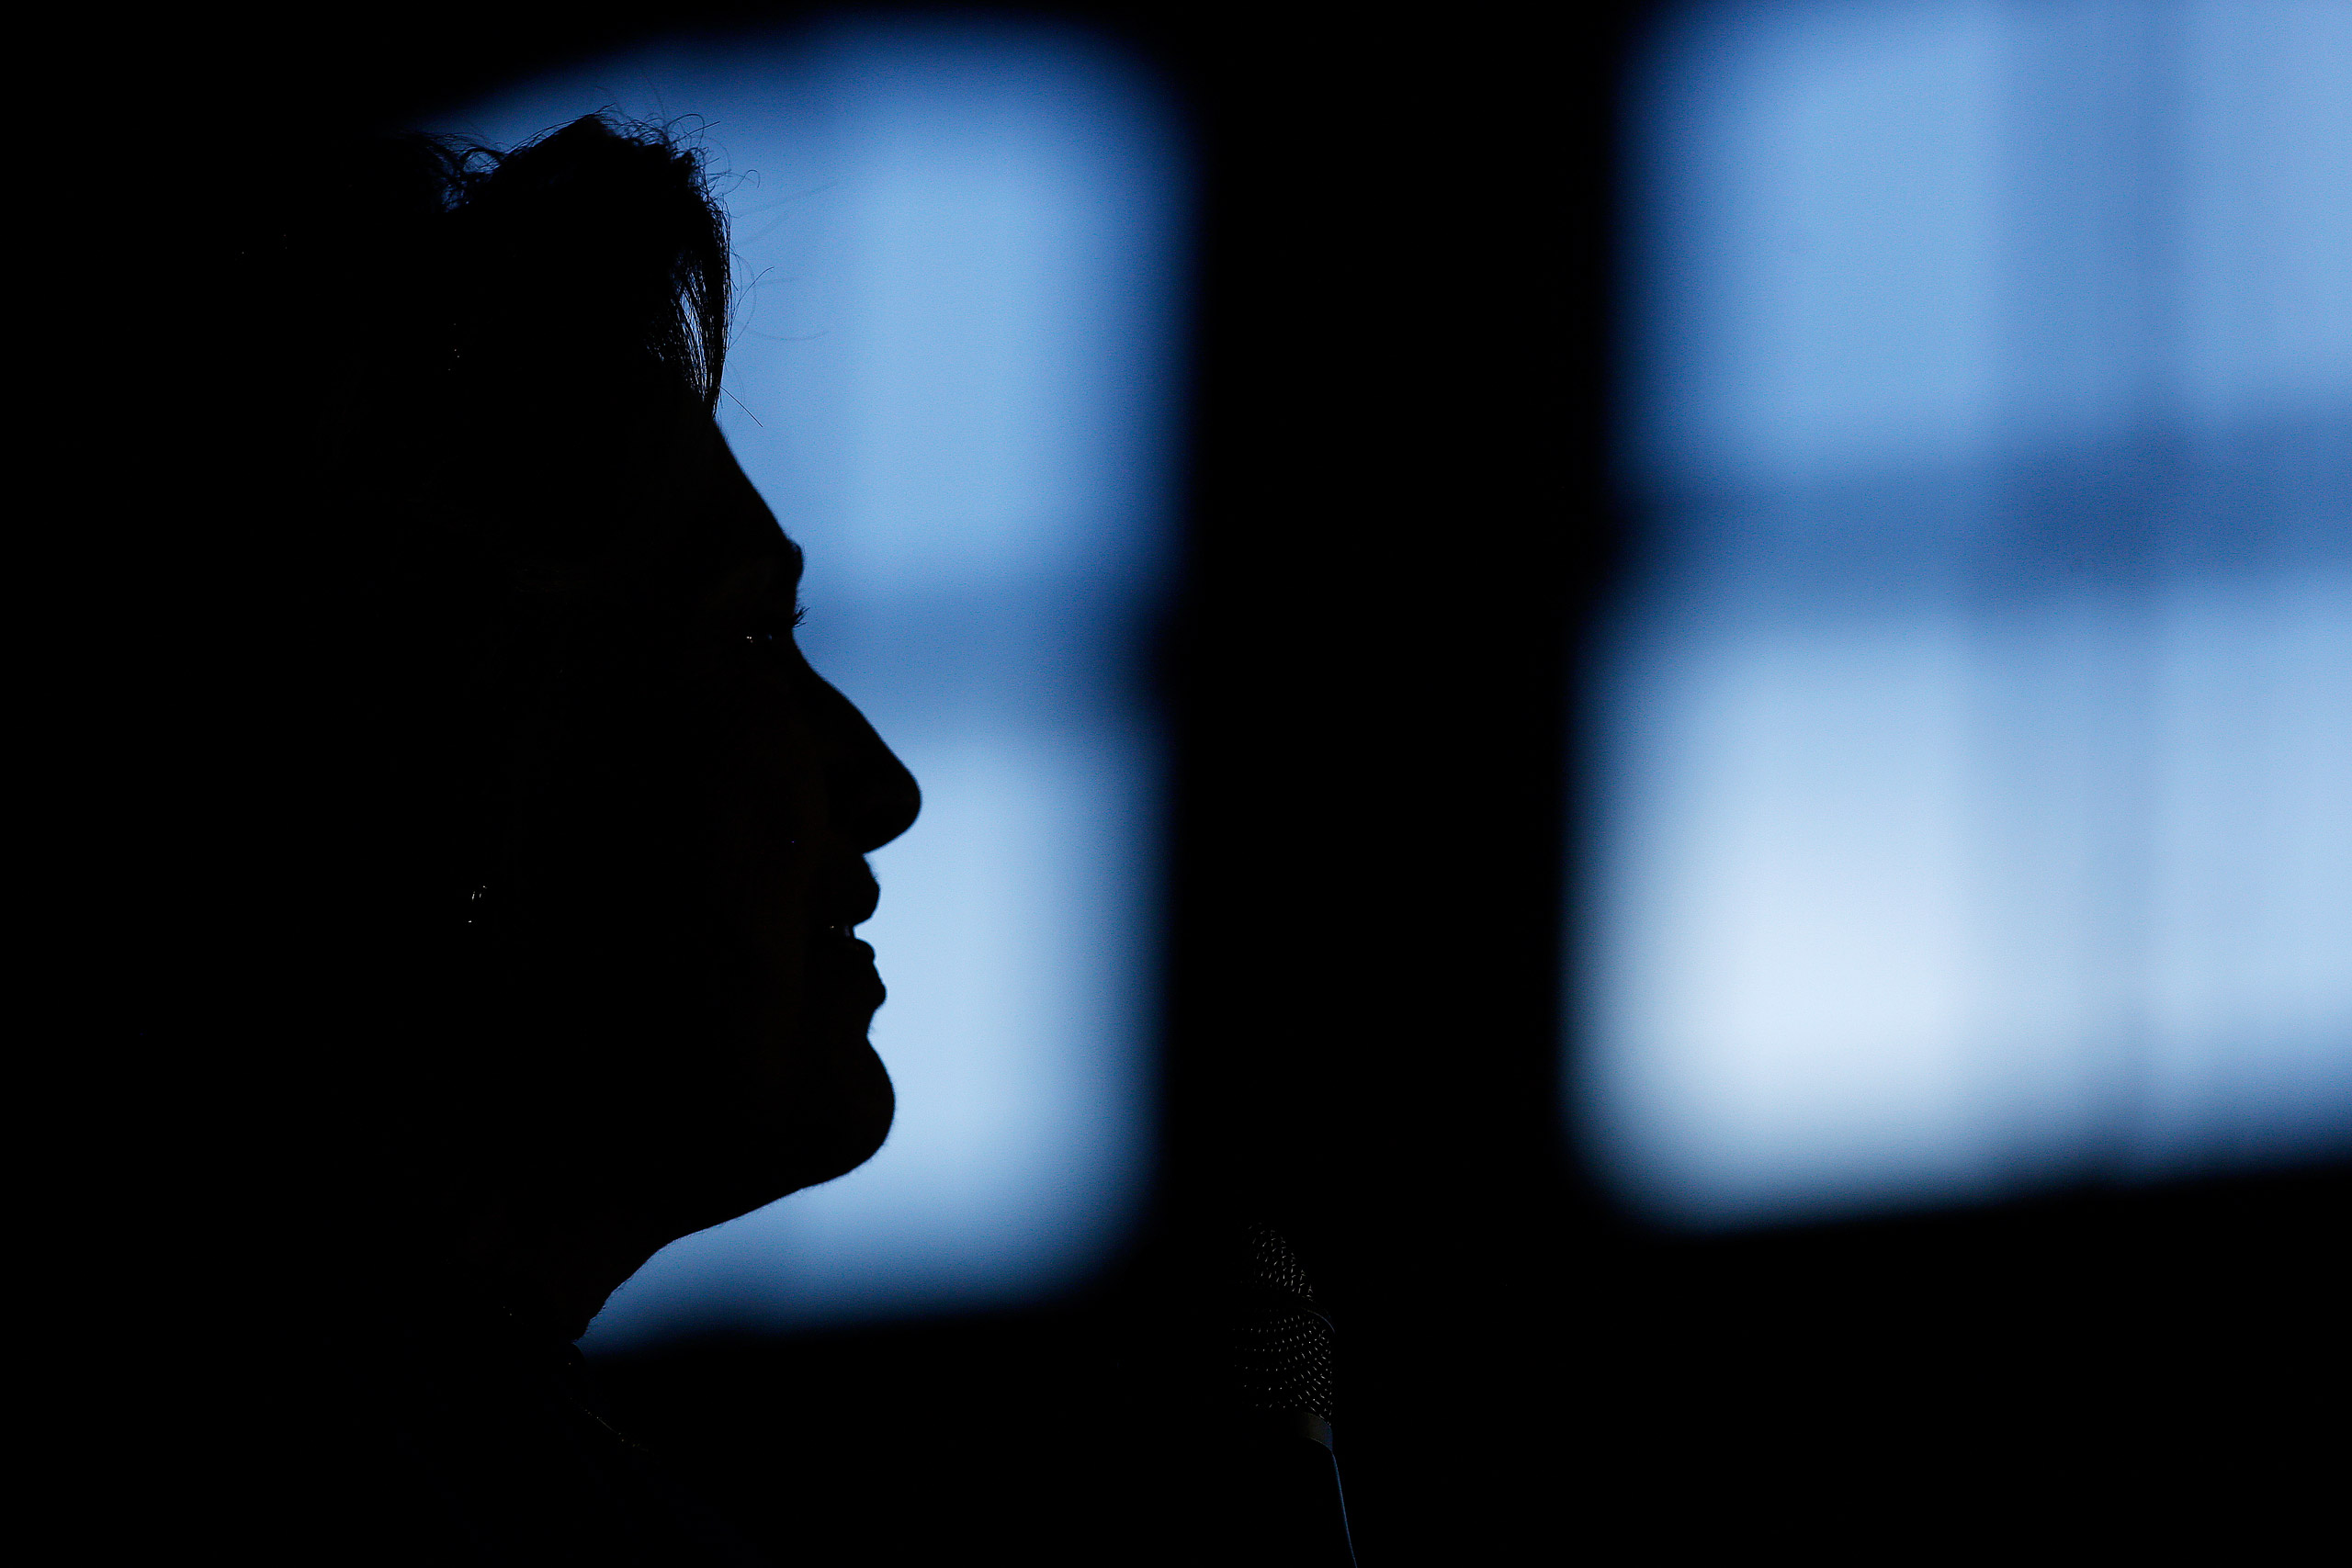 The silhouette of Hillary Clinton, former Secretary of State and 2016 Democratic presidential candidate, is seen during a campaign event in Louisville, Kentucky, U.S., on Tuesday, May 10, 2016. Clinton said she sees "a great role" for Bernie Sanders and his supporters in a "unified party," even as she said she welcomed Republicans who are not supporting presumptive nominee Donald Trump. Photographer: Luke Sharrett/Bloomberg via Getty Images